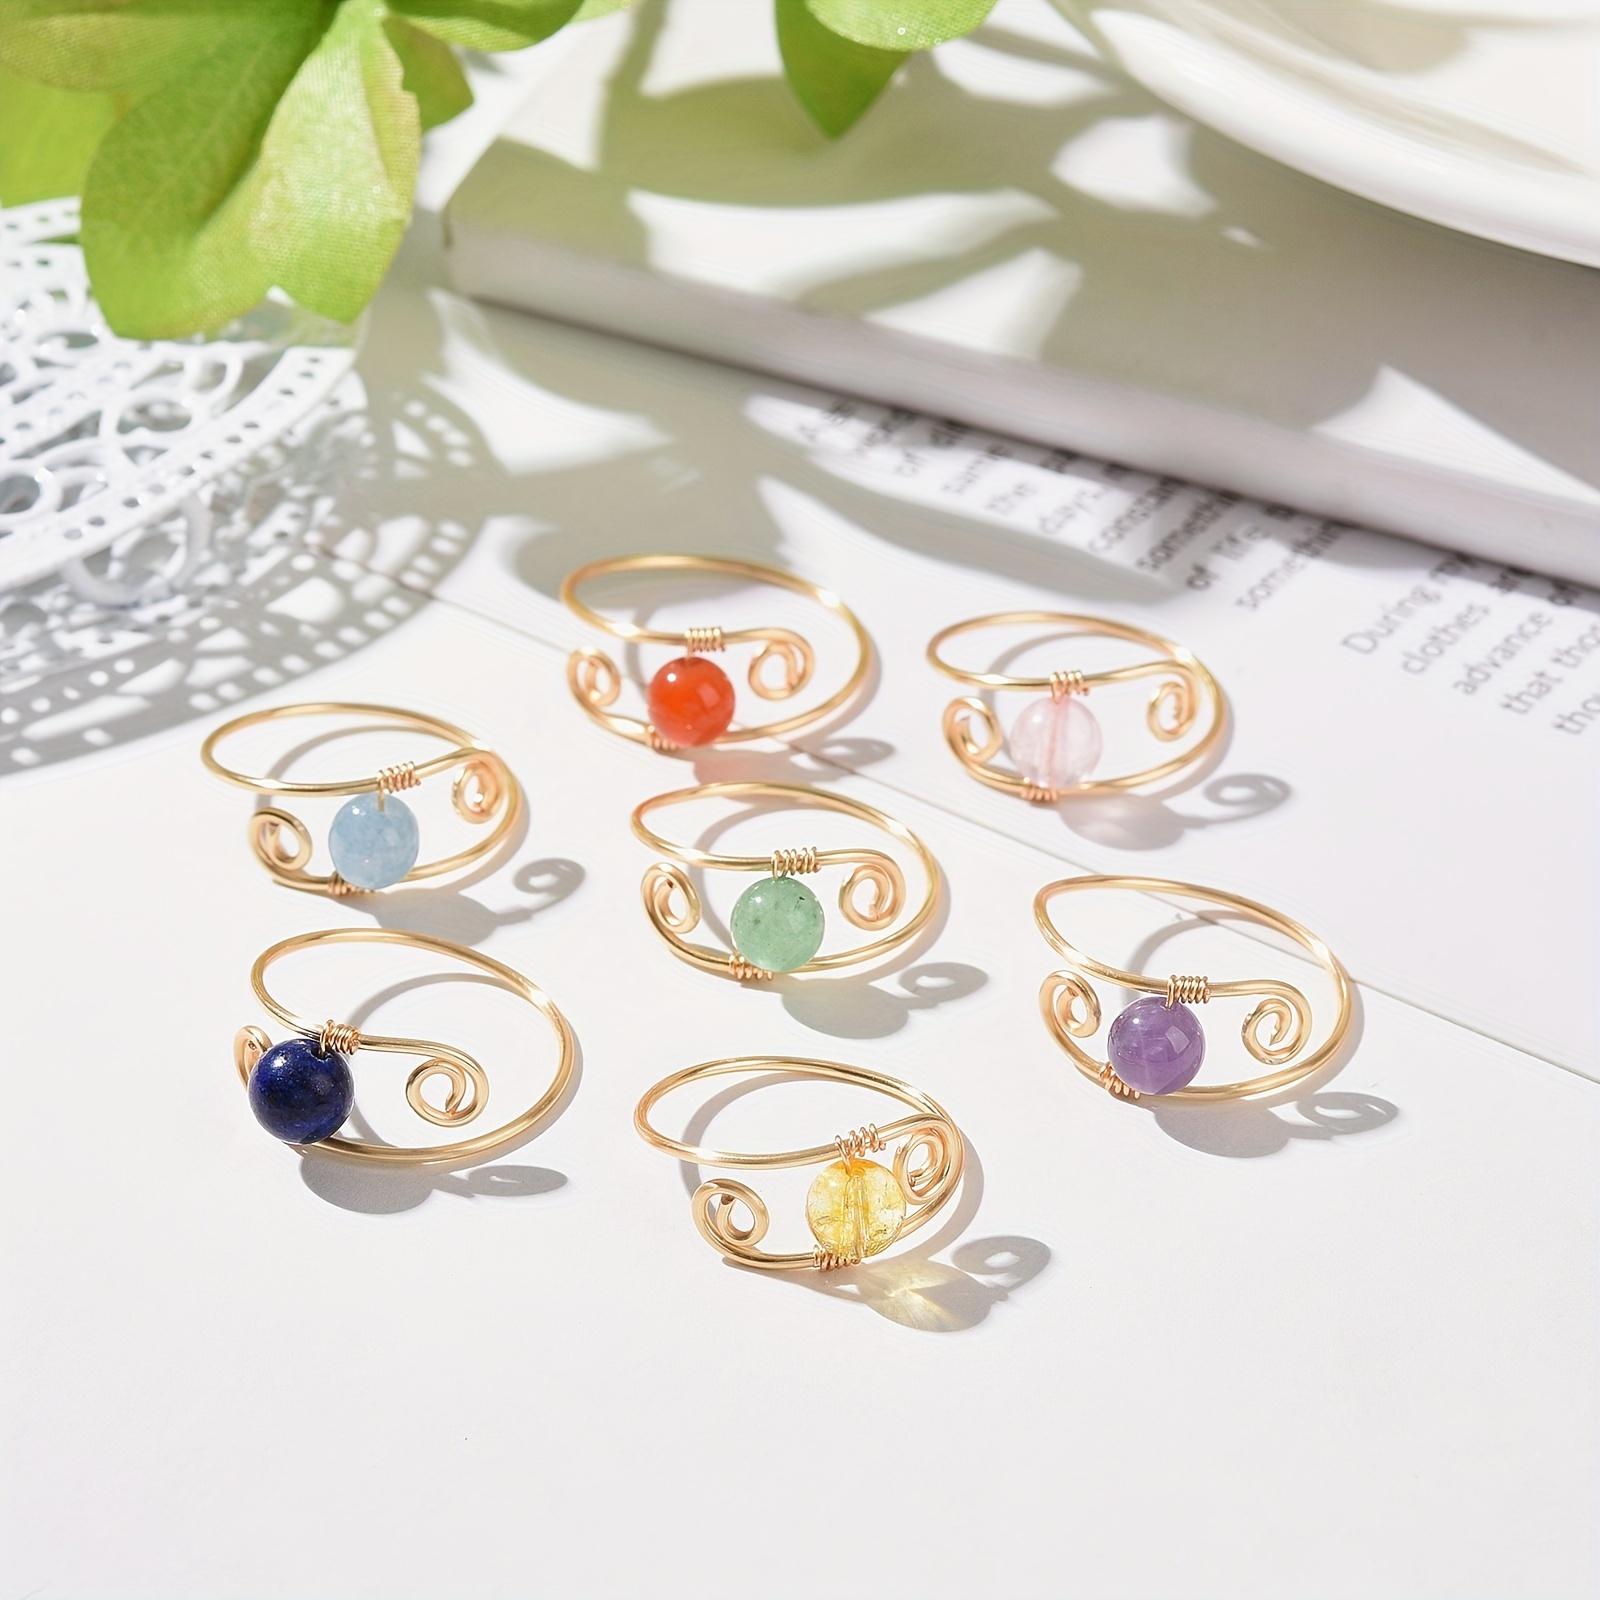 

7-piece Stone Embellished Spiral Wire Ring Set For Women - Golden Tone Fashion Jewelry With Assorted Gemstone Charms